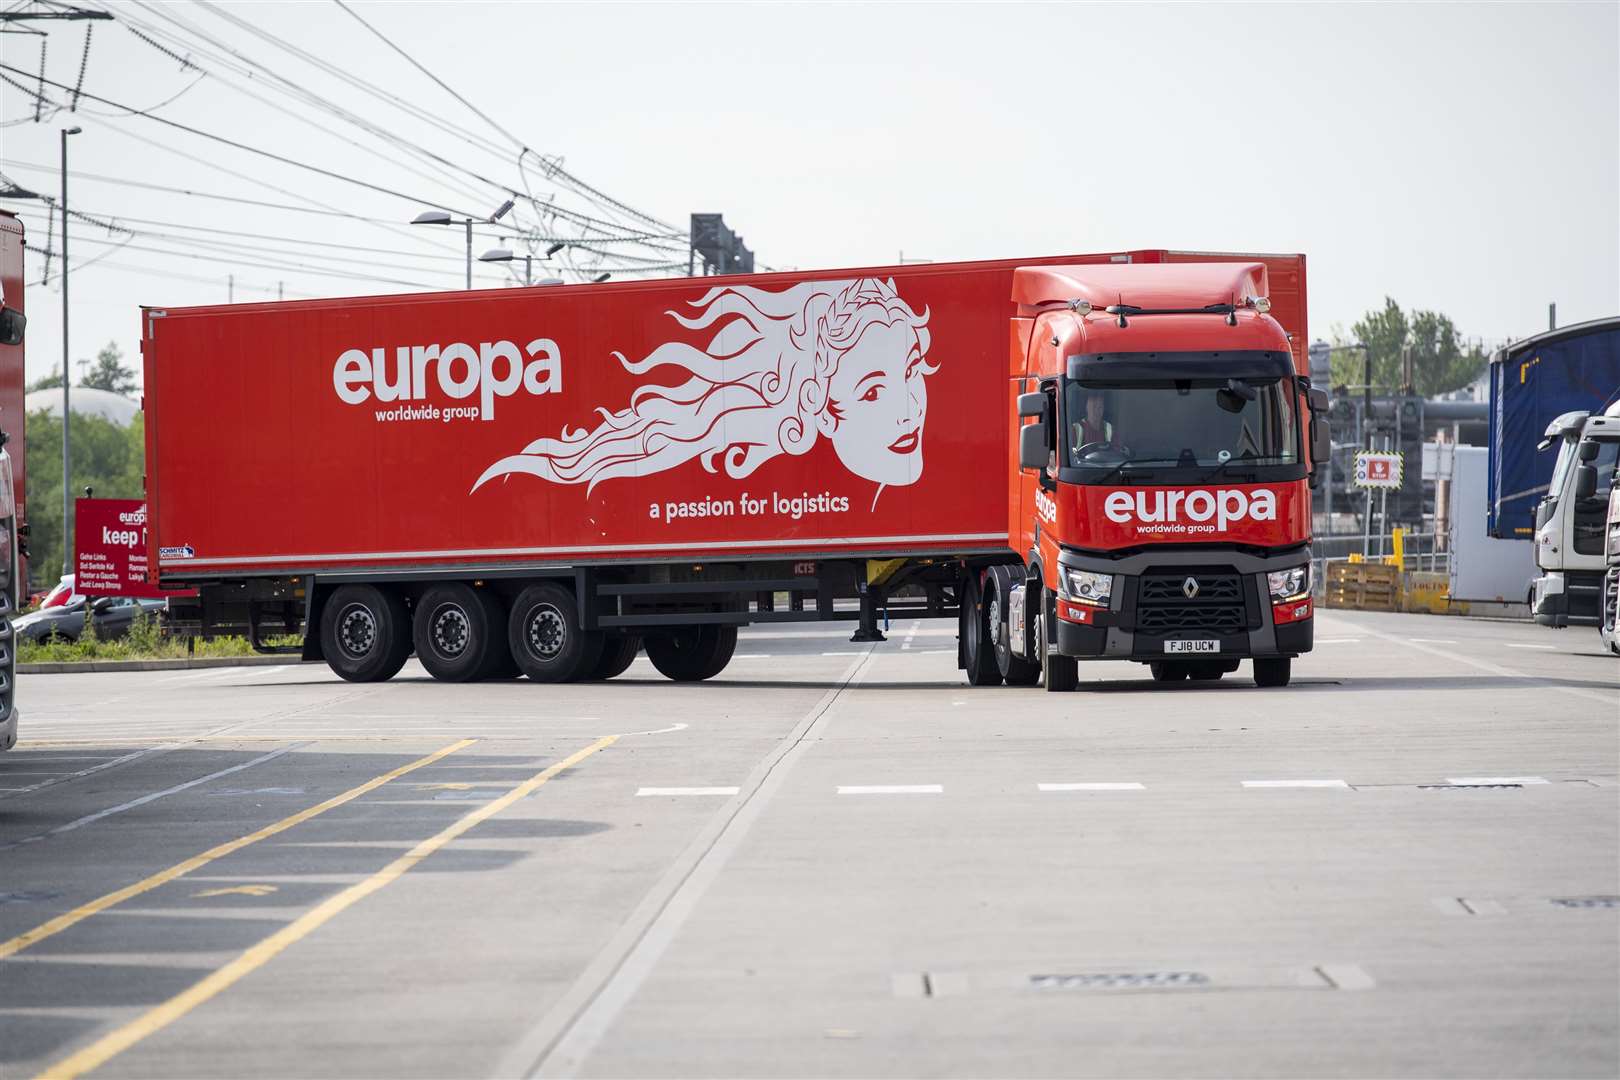 Europa has launched a driving academy